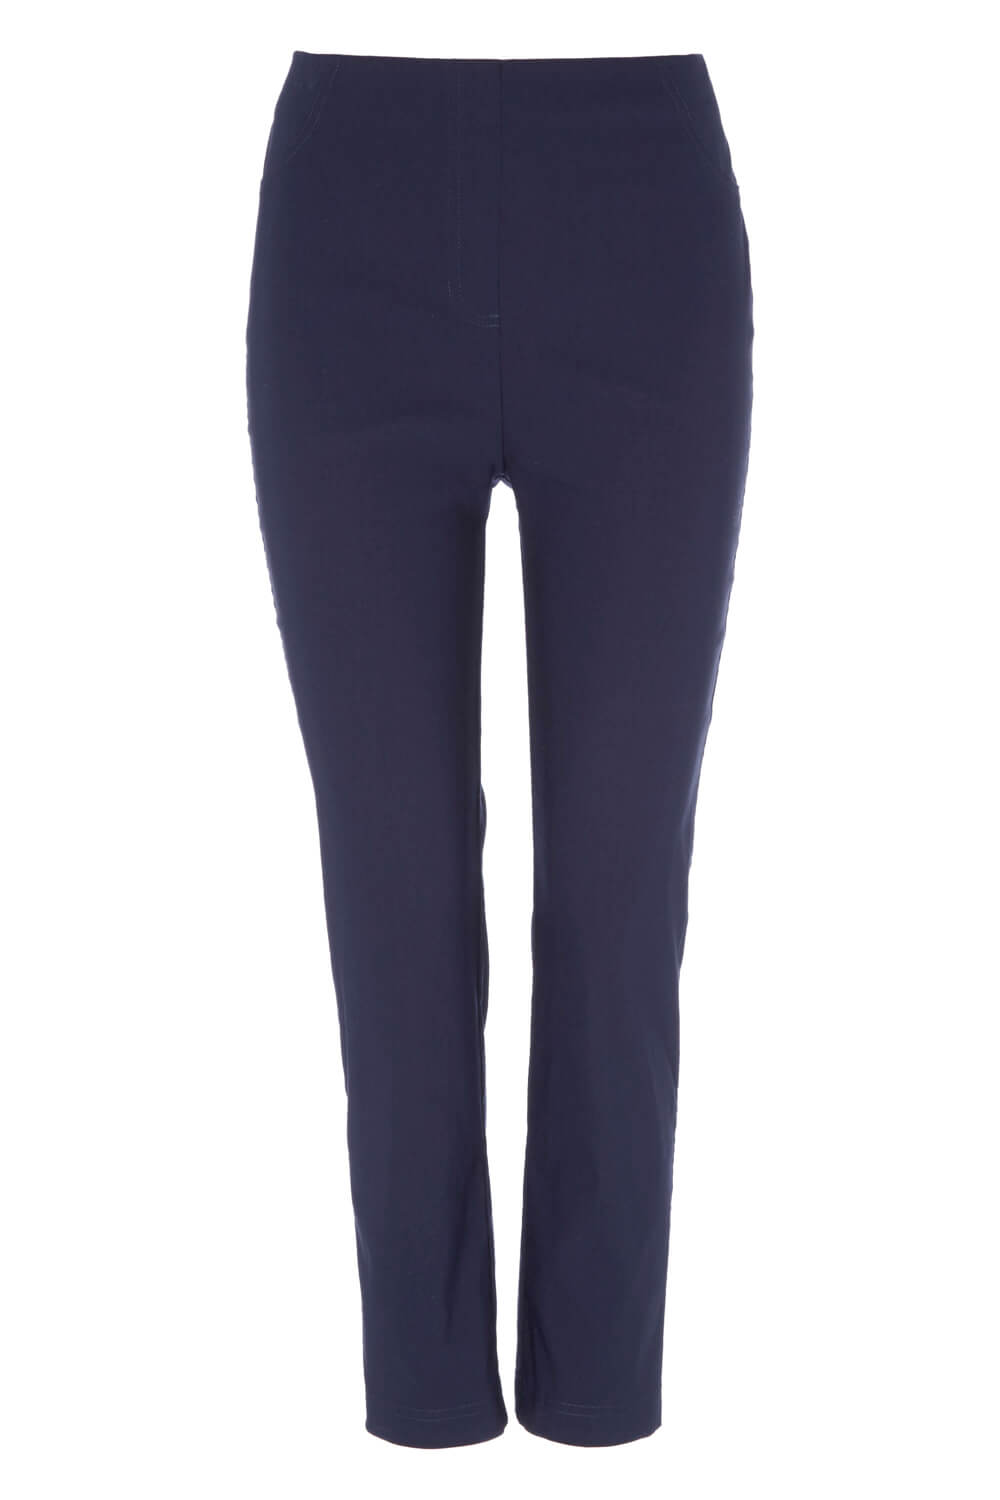 Navy  3/4 Length Stretch Trouser, Image 4 of 4